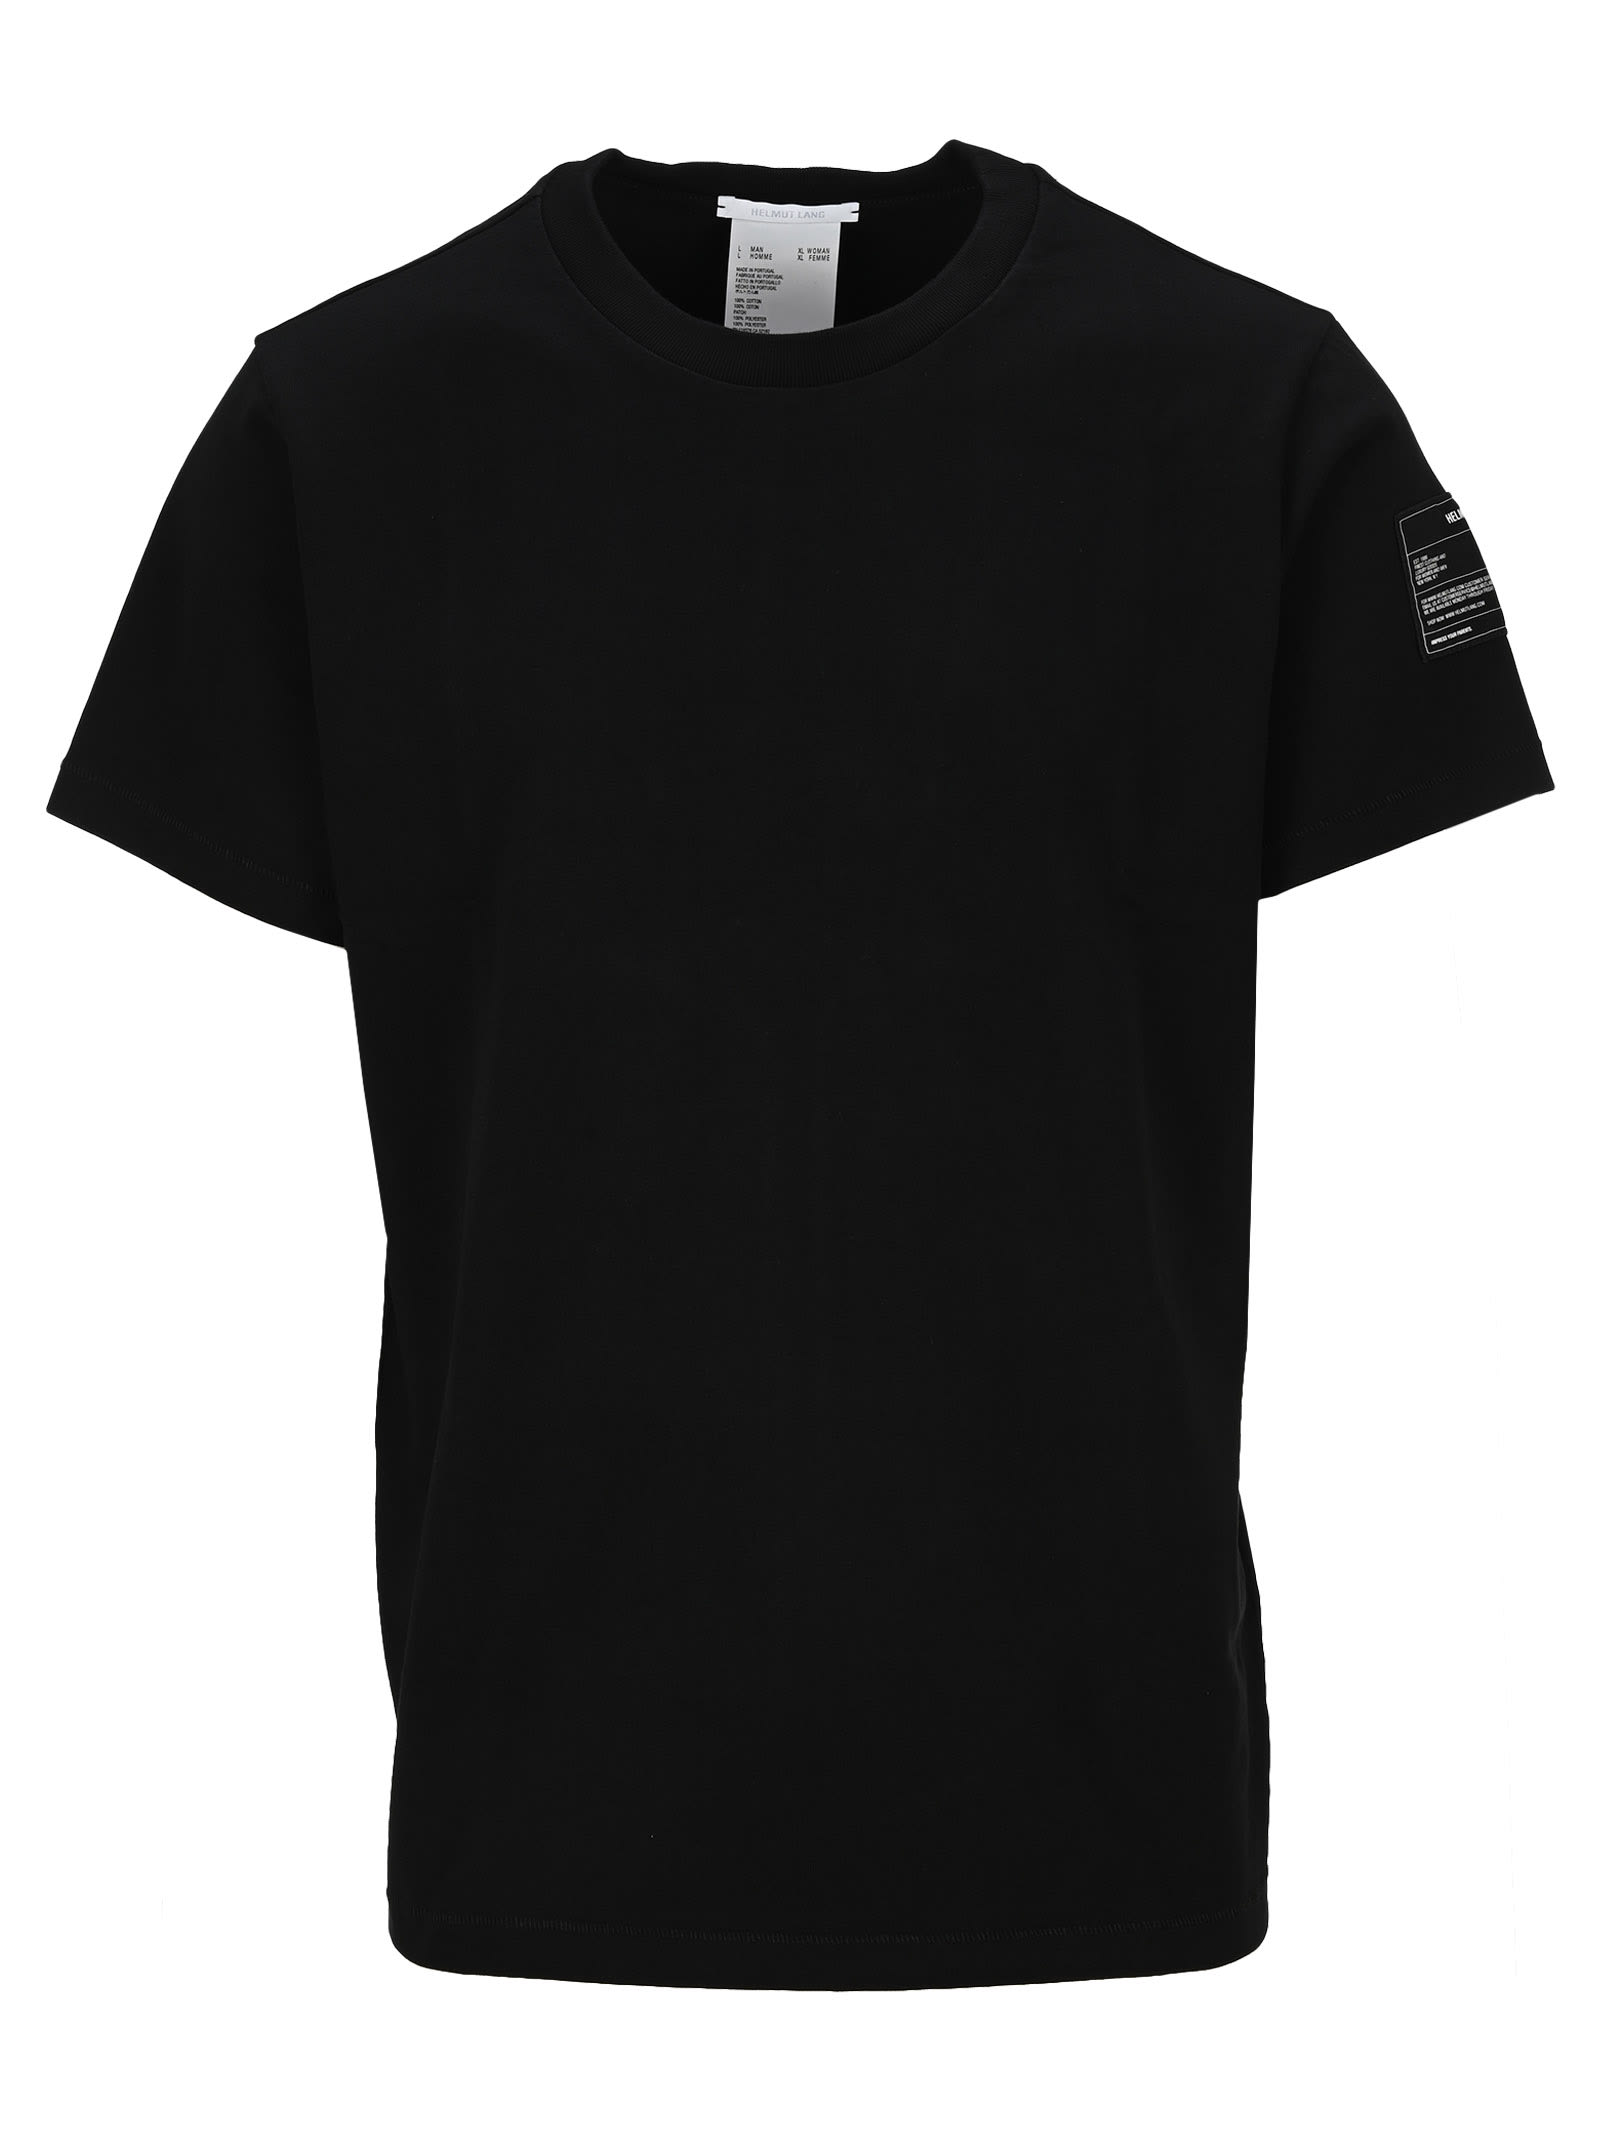 Helmut Lang Patch Tee